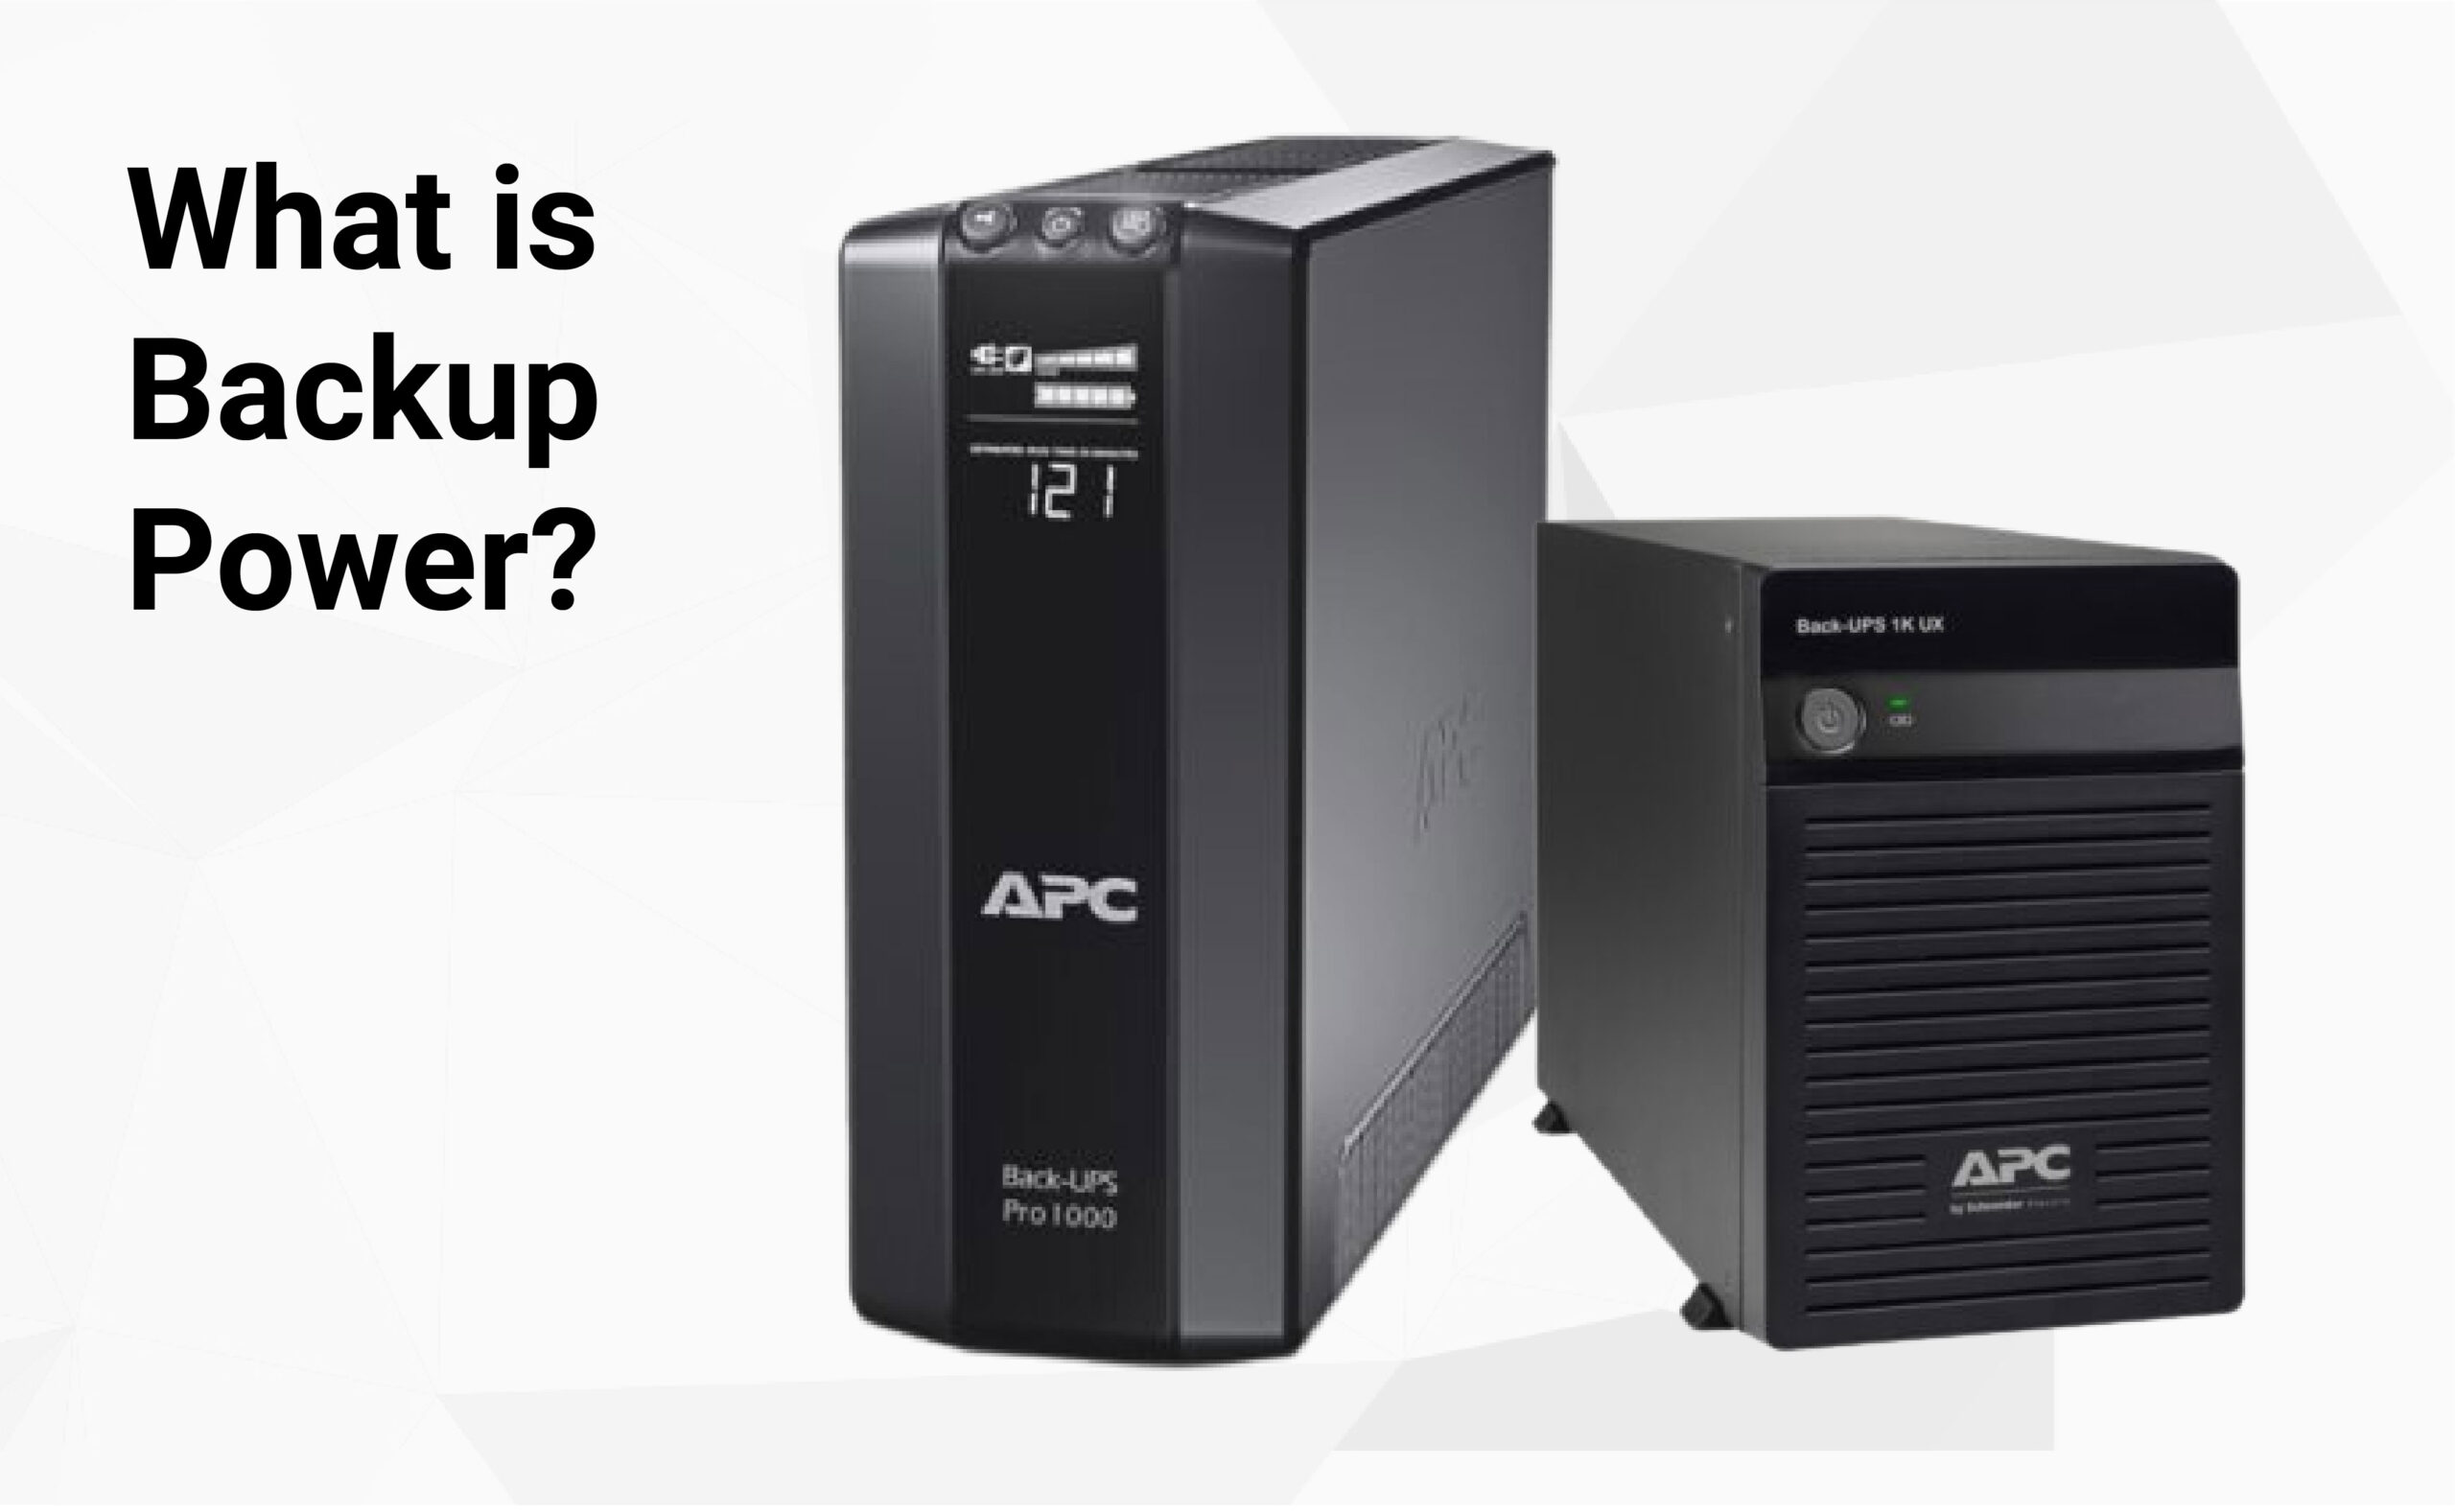 What is Backup Power?